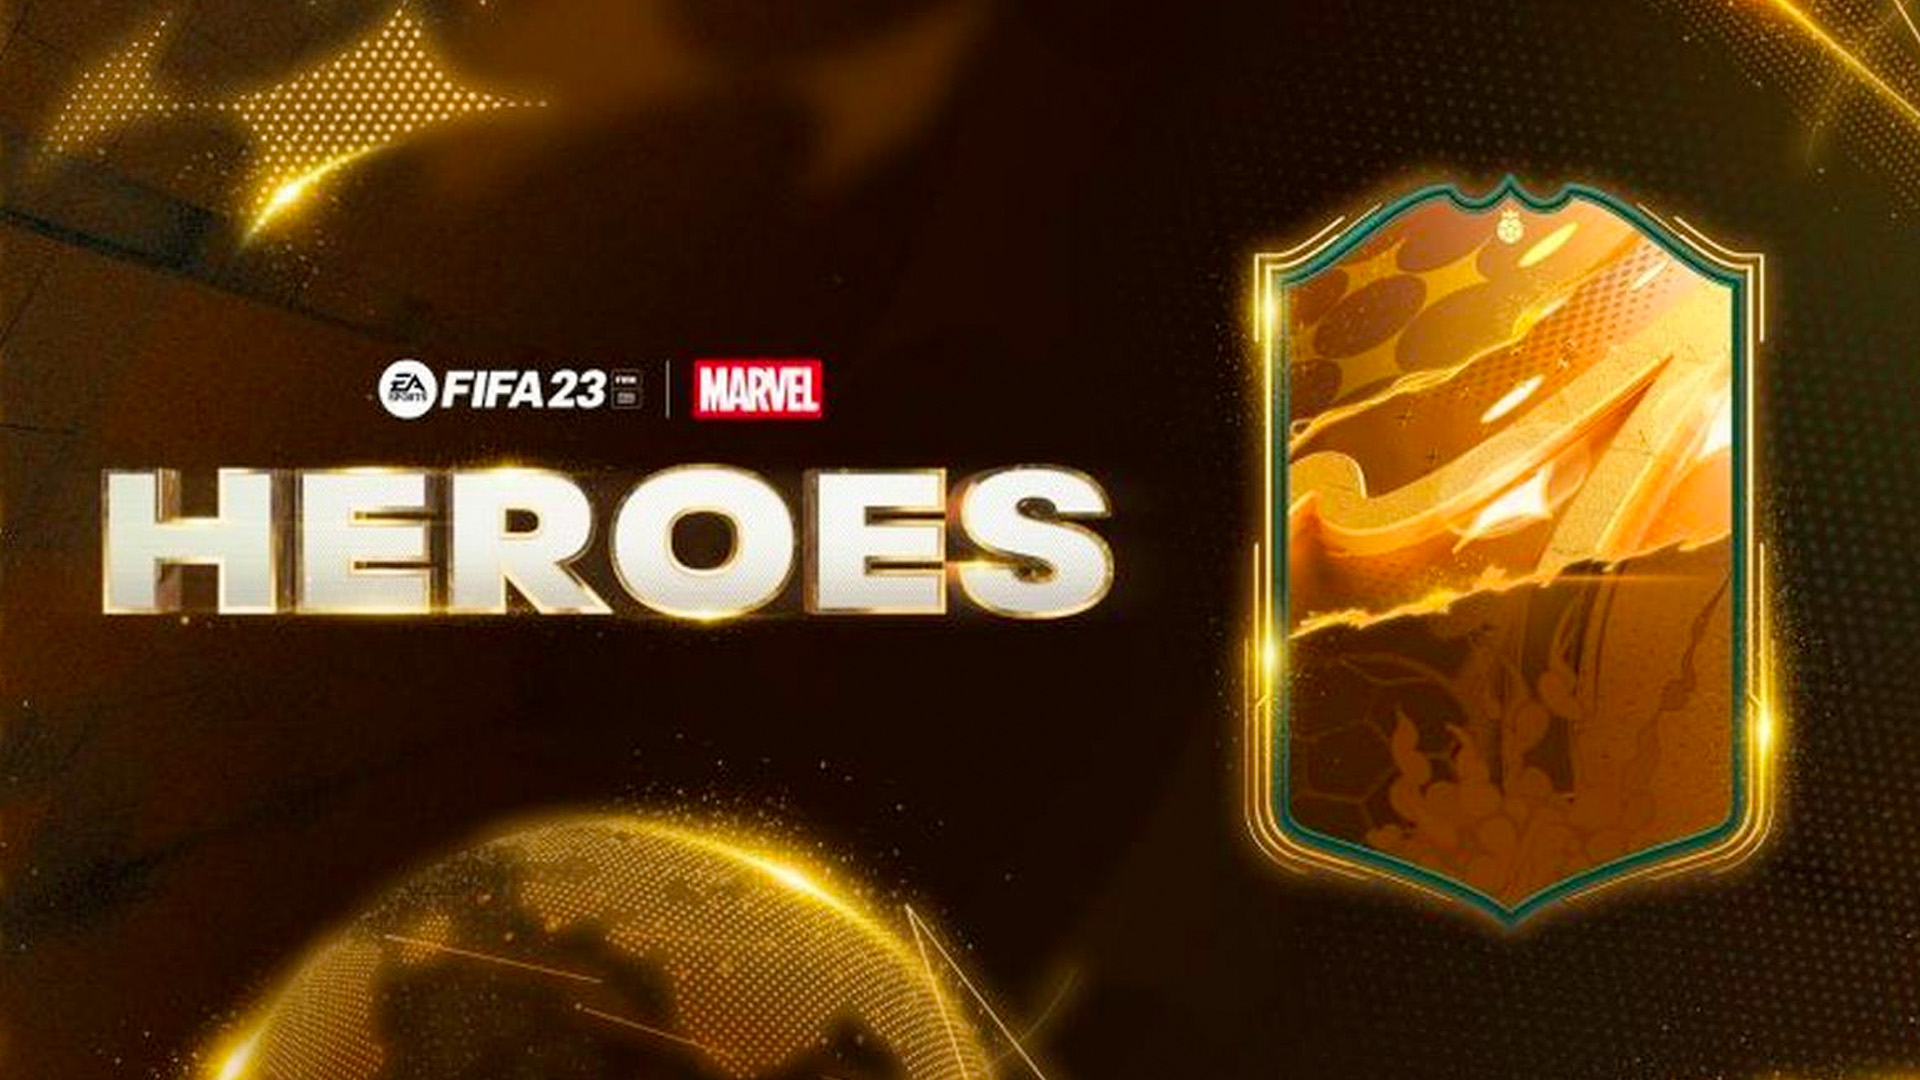 FIFA 23 Heroes: The Marvel logo found on official FIFA 23 promotional material